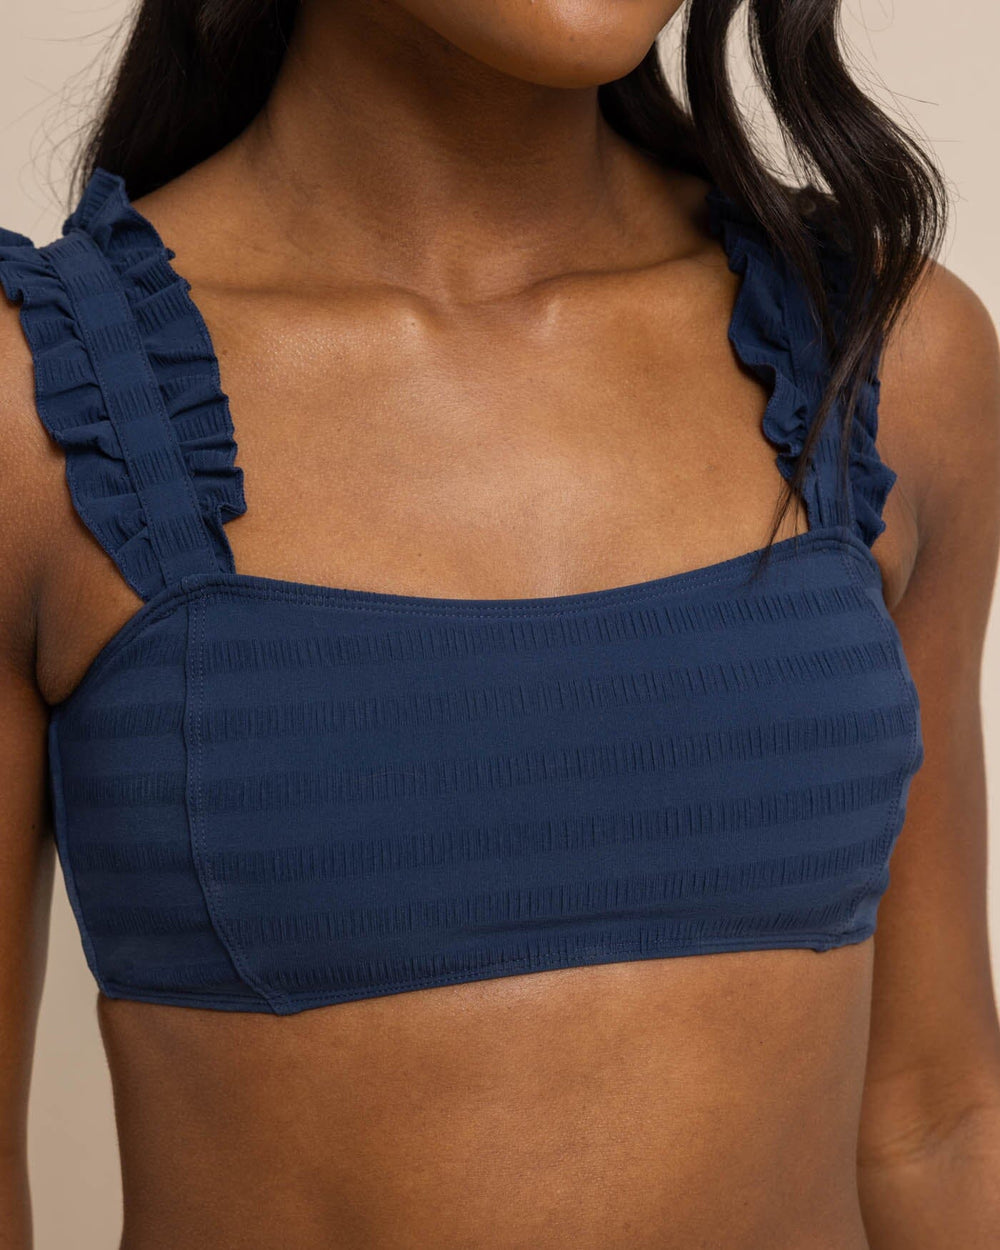 The detail view of the Southern Tide Ruffle Bikini Top in Texture by Southern Tide - Dress Blue